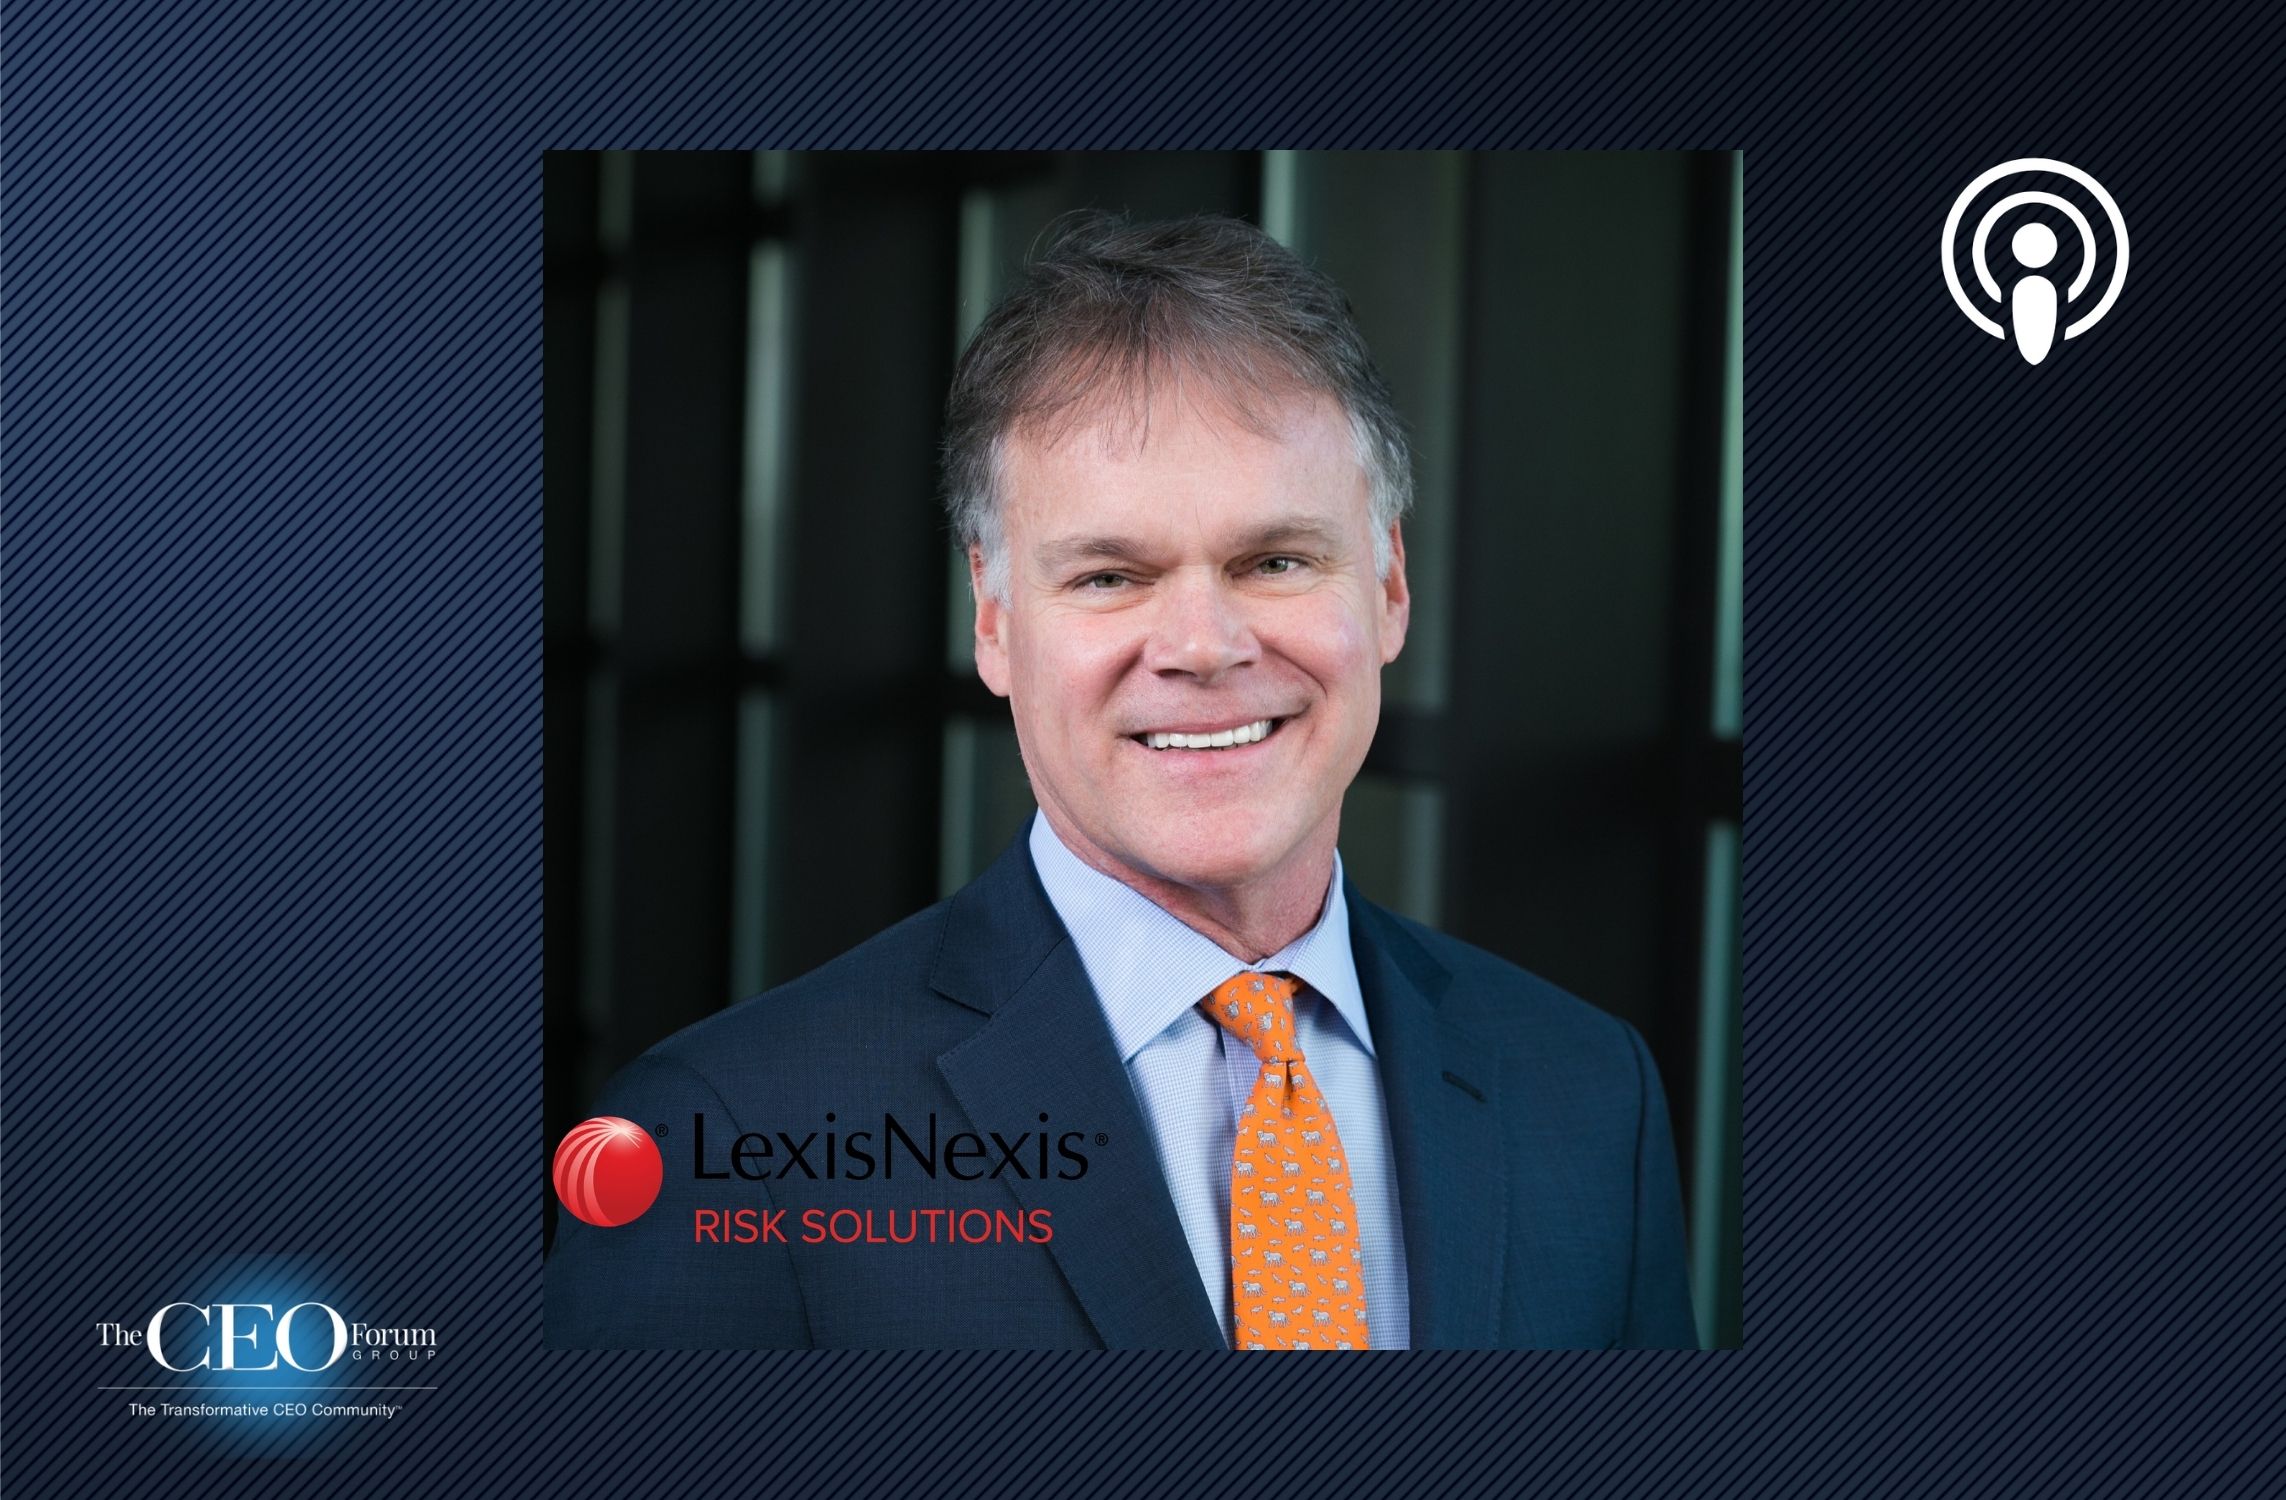 Bill Madison, CEO of LexisNexis Risk Solutions, Insurance Division